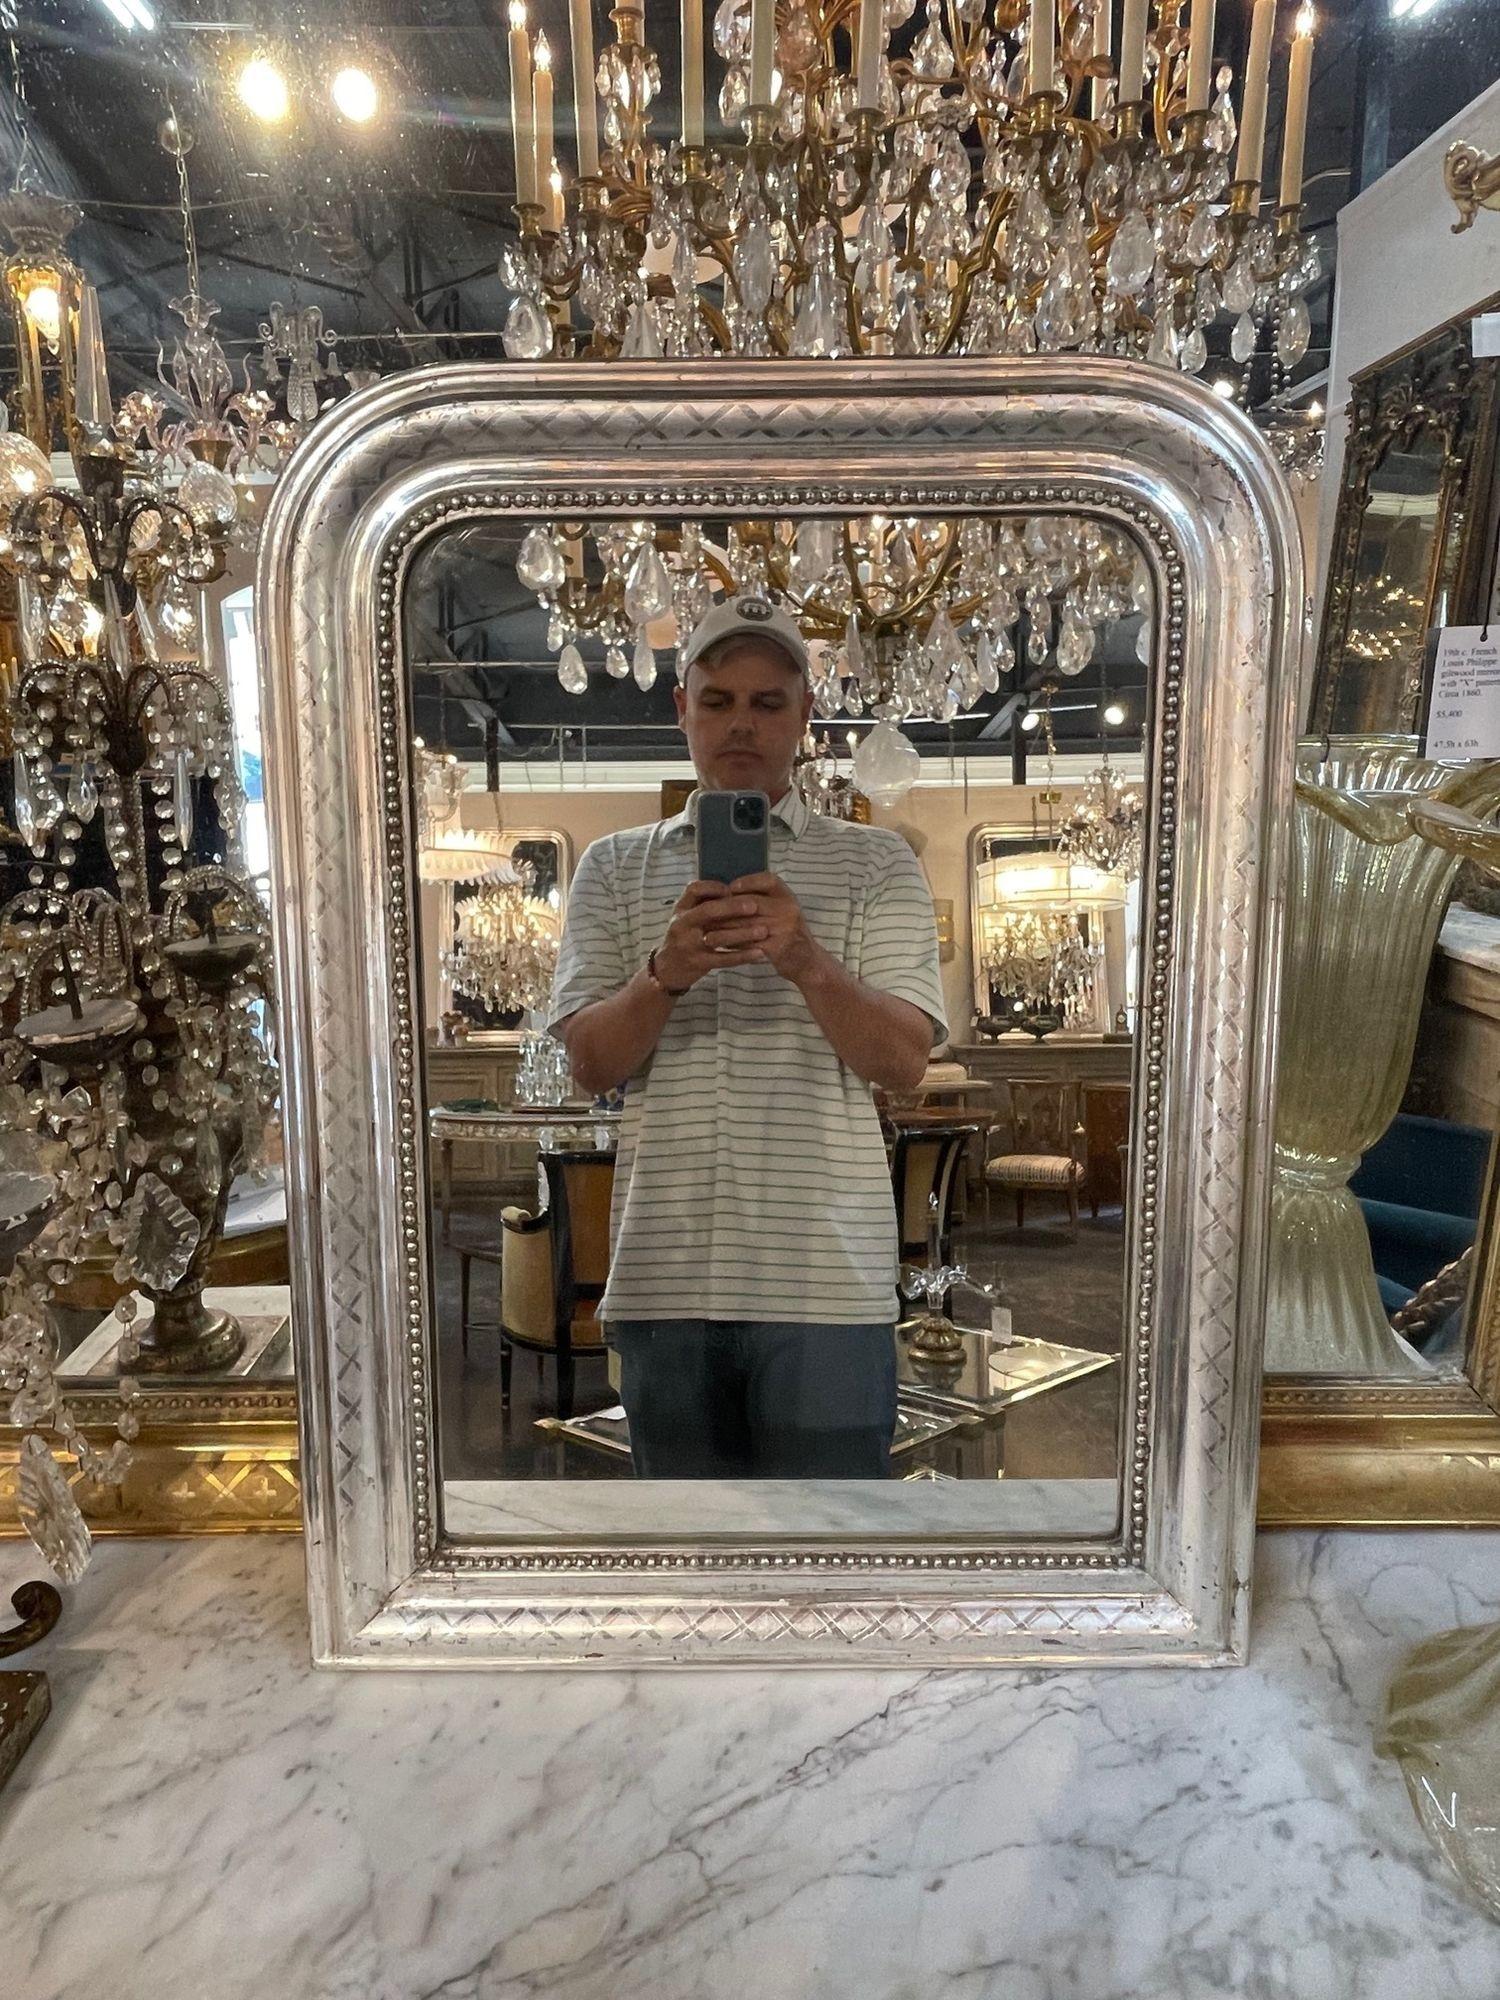 Very fine 19th century French silver leaf Louis Philippe mirror with X pattern. Very fine quality. Great for a powder room! So pretty!